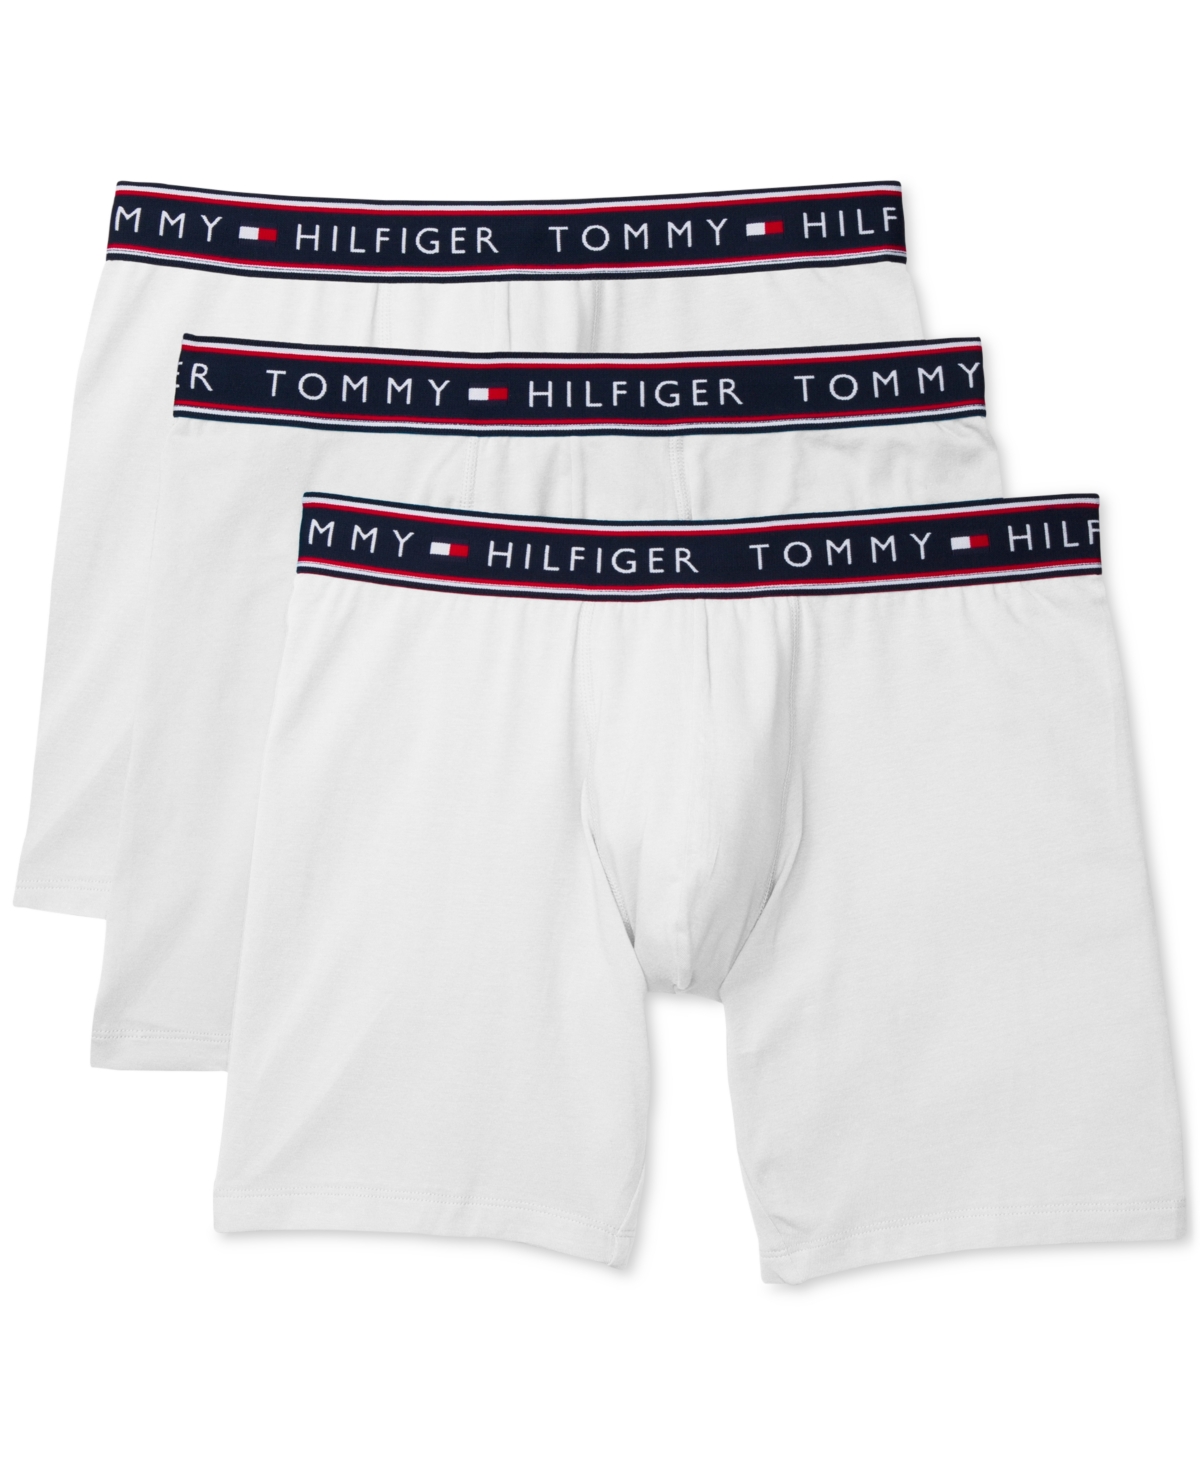 UPC 088541539319 product image for Tommy Hilfiger Men's Cotton Stretch Boxer Brief, 3 Pack | upcitemdb.com